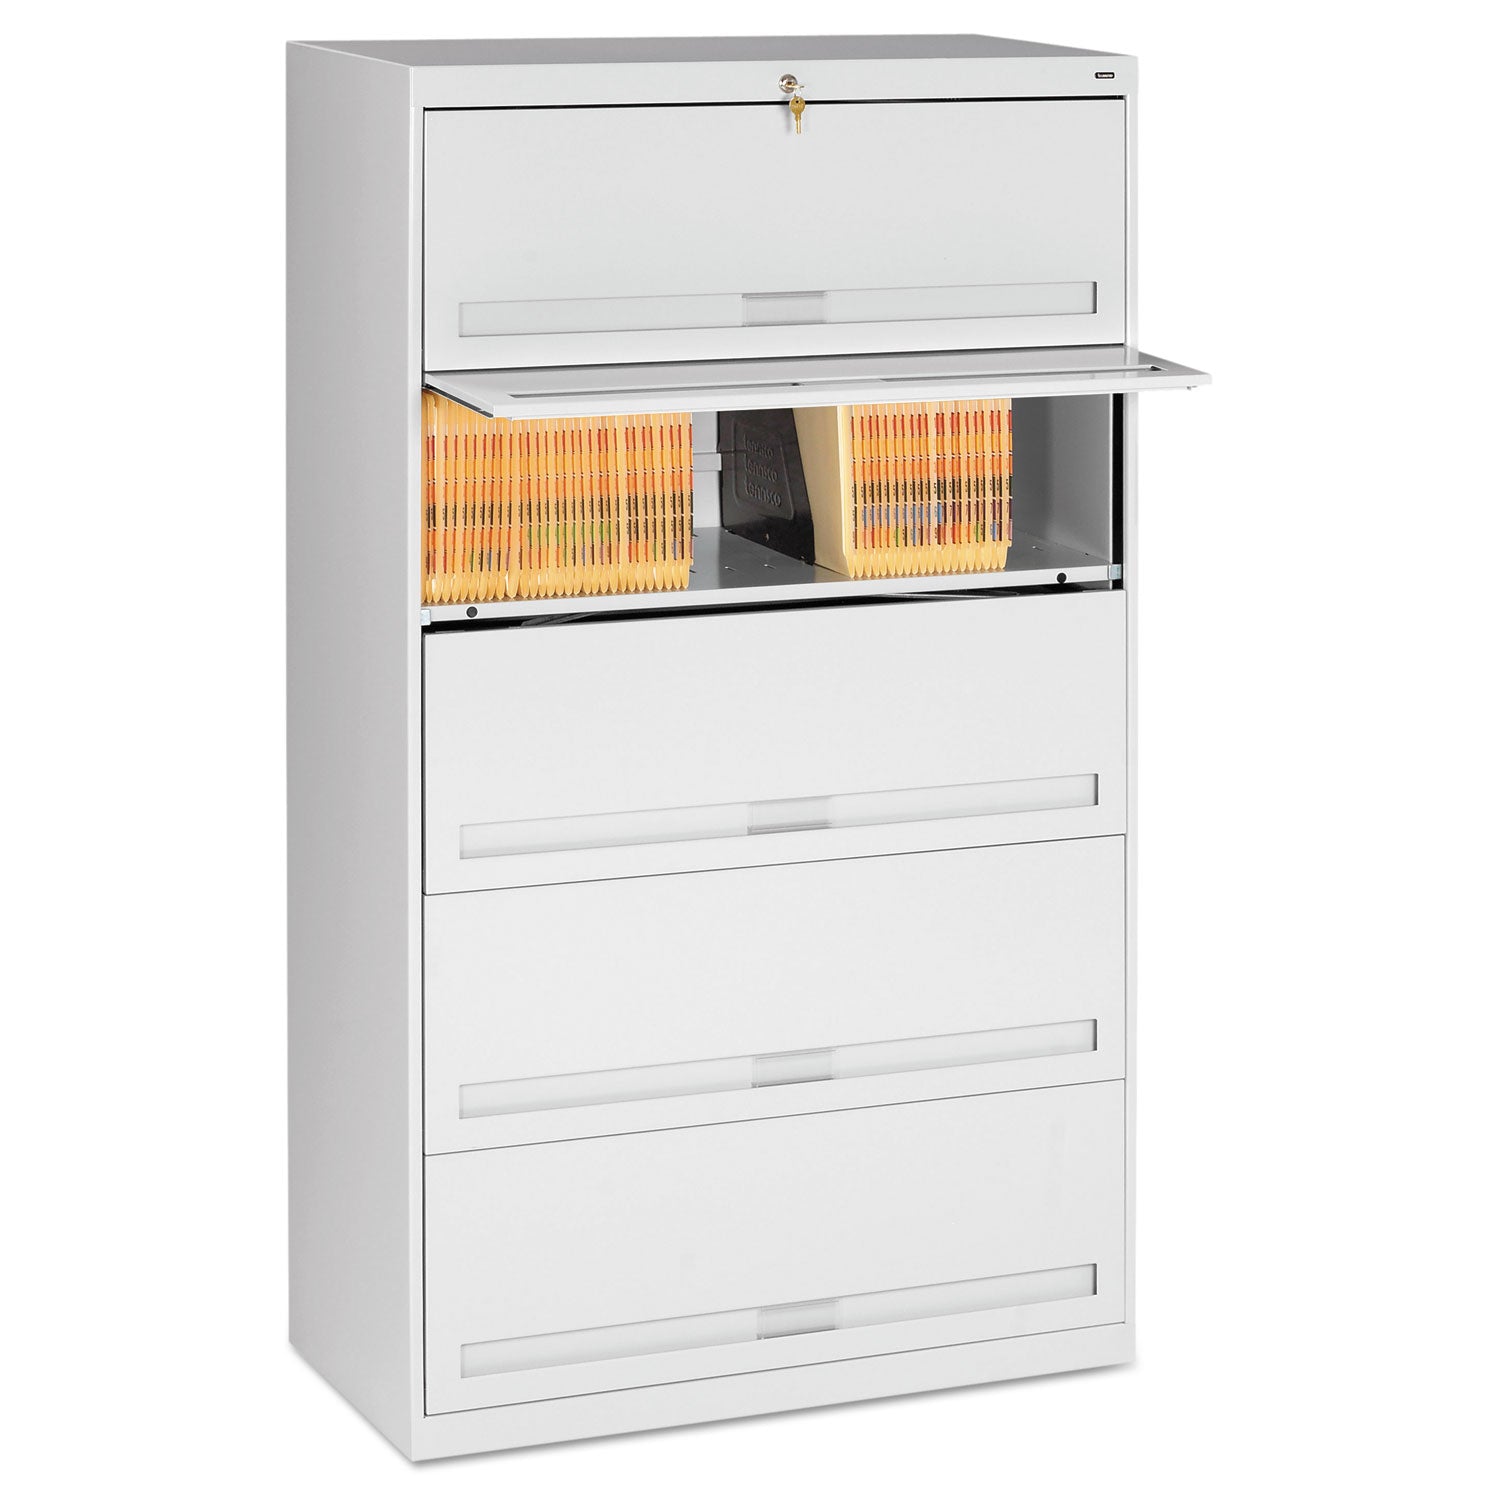 fixed-shelf-enclosed-format-lateral-file-for-end-tab-folders-5-legal-letter-file-shelves-light-gray-36-x-165-x-635_tnnfs351llgy - 1